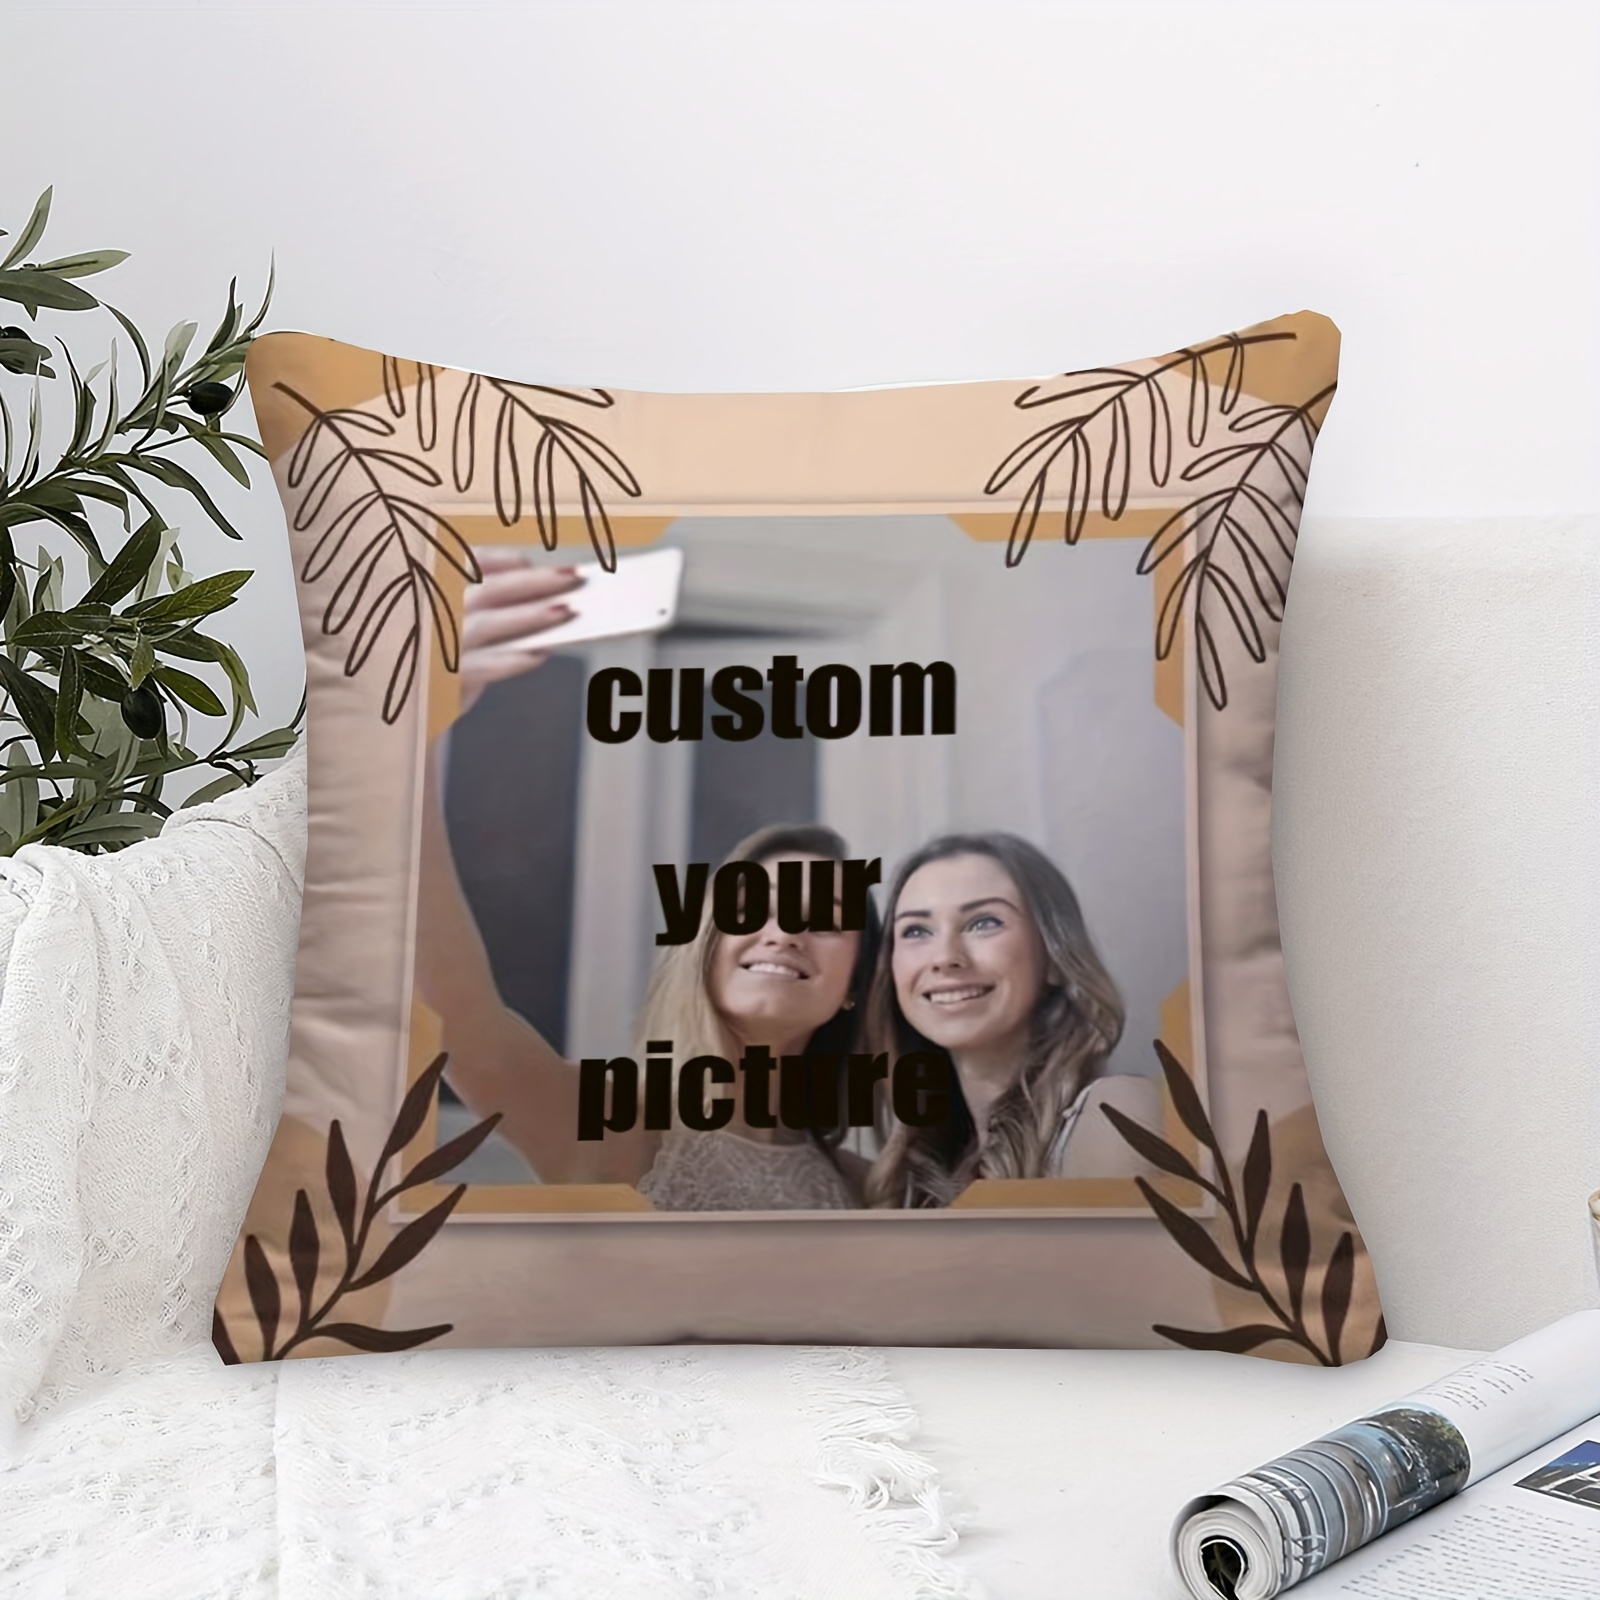 

1pc Personalized Gifts For Her/ Women/girls - Custom Square With Your Own Designs, Photos Or Text, Etc Super soft short plush throw pillow loss 18x18 inch(no pillow core)